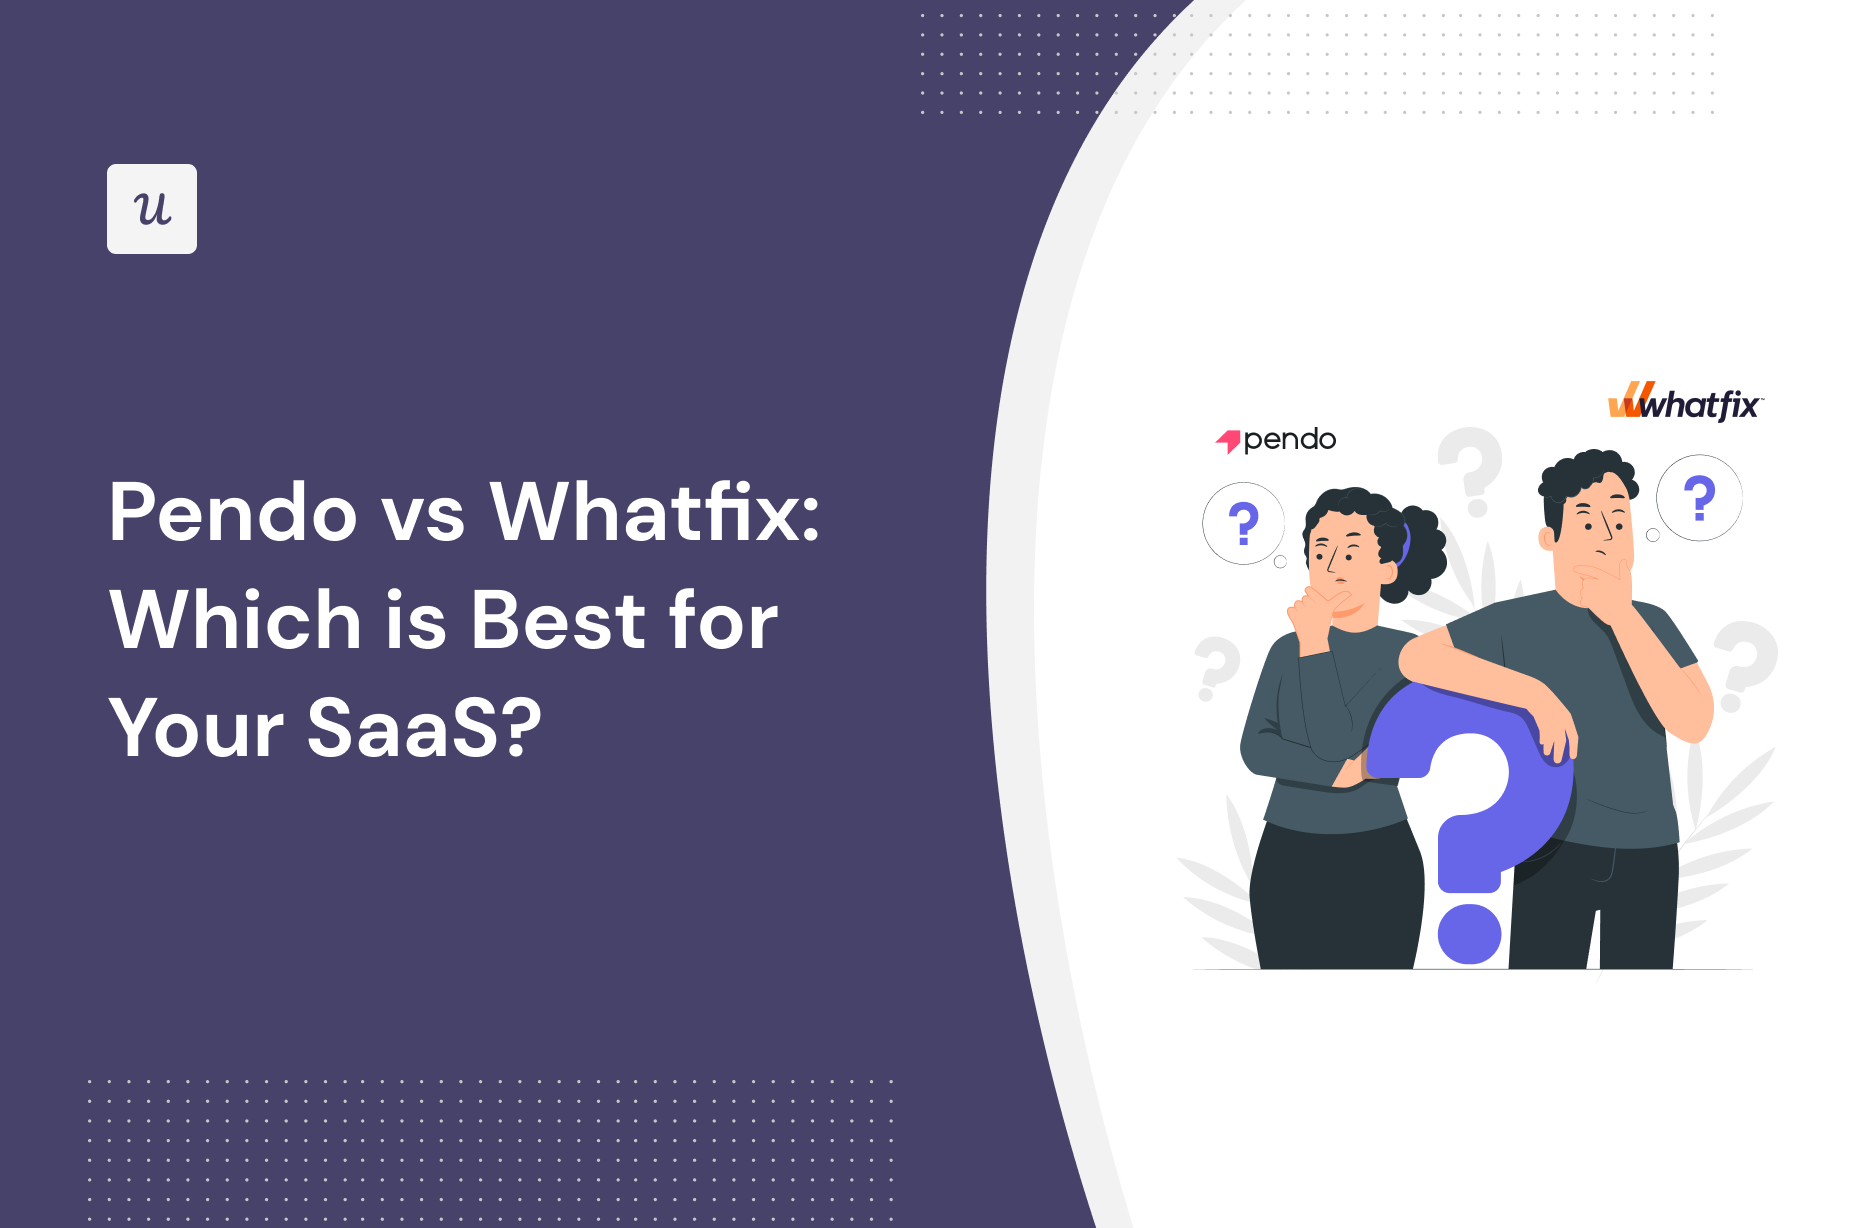 Pendo vs Whatfix: Which is Best for Your SaaS?